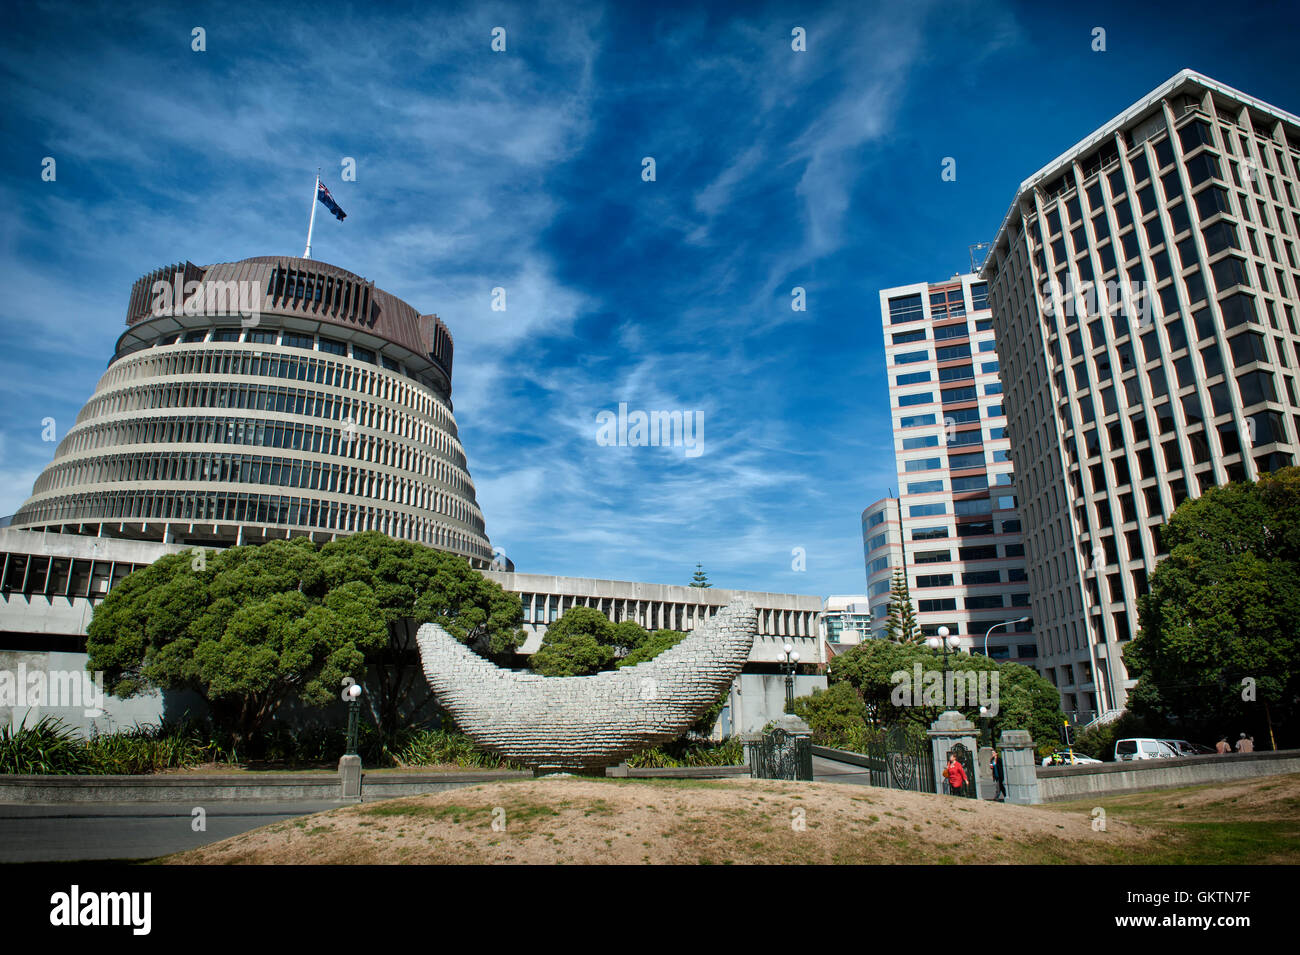 Wellington, New Zealand - March 3, 2016: The Beehive, the Executive Wing of the New Zealand Parliament Buildings Stock Photo